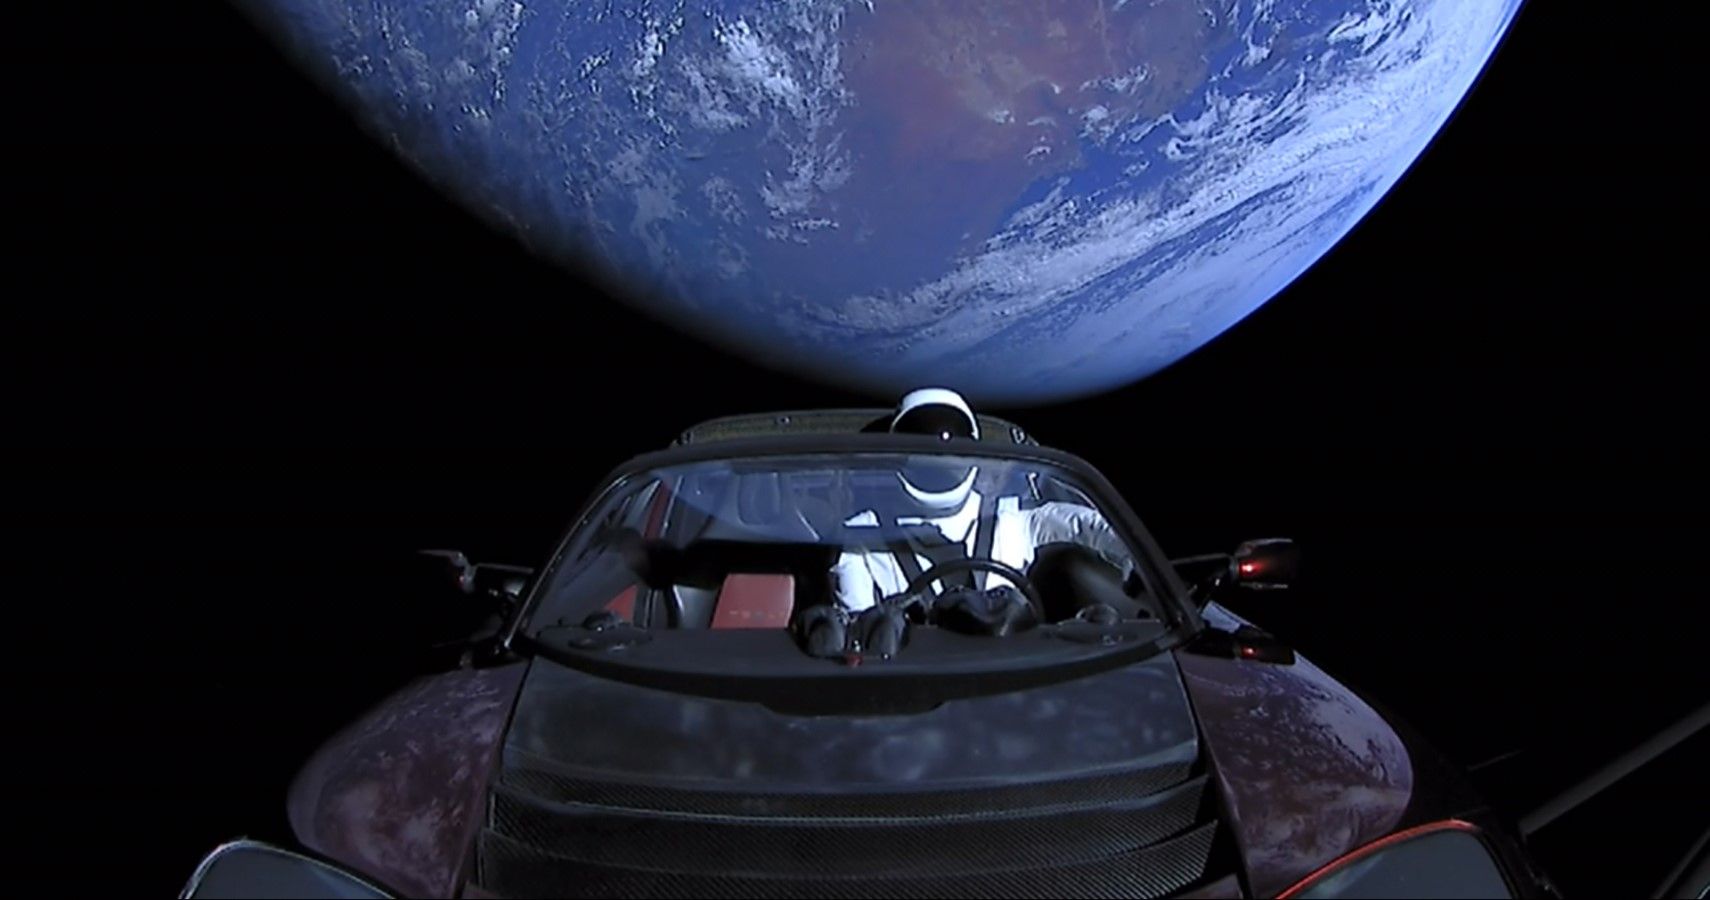  Tesla Roadster and Starman in space one of the last taken photos front view